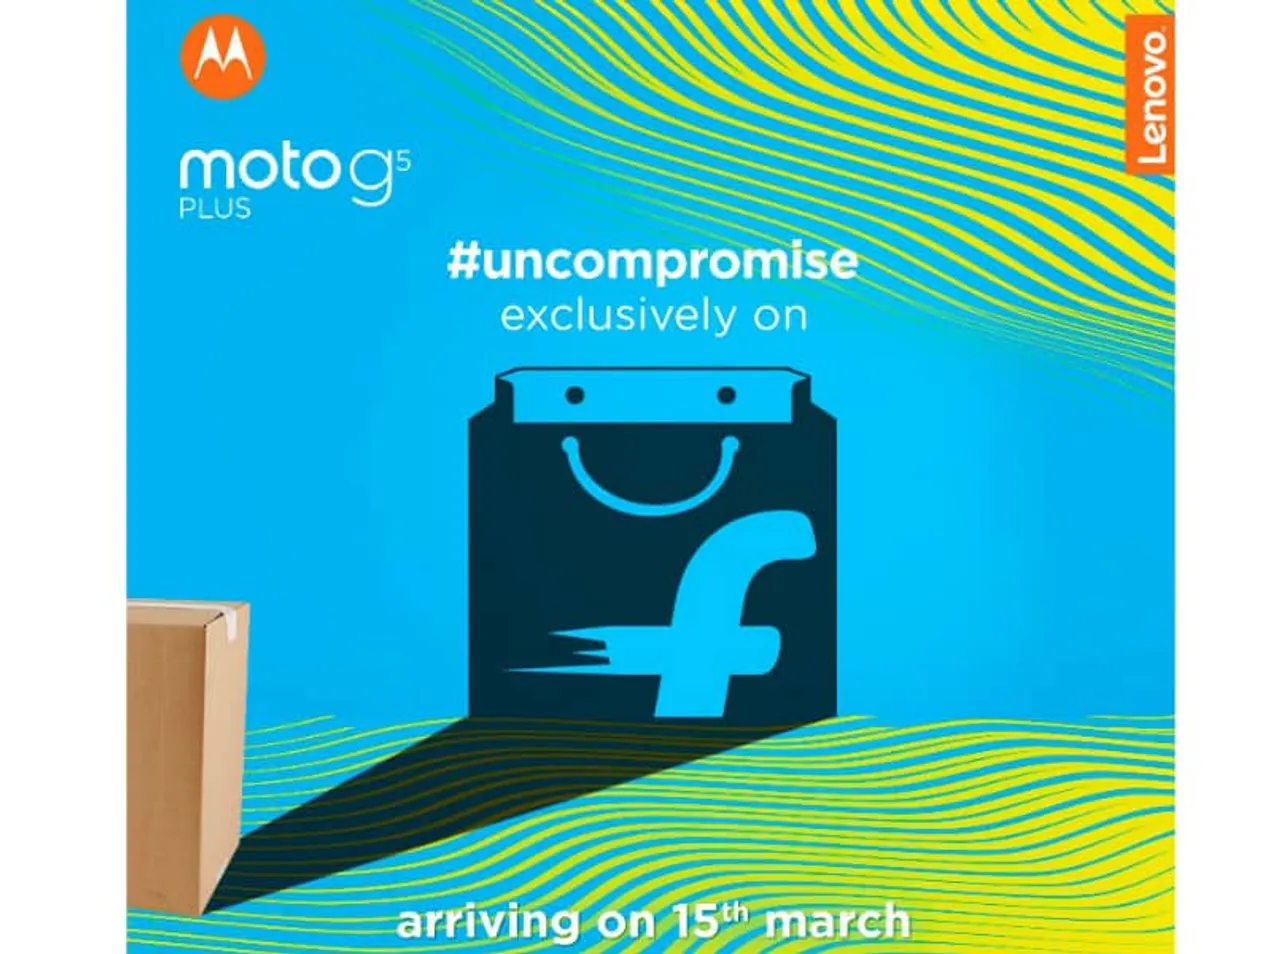 Flipkart introduces “BuyBack Programme” with the Exclusive Launch of Moto G5 Plus